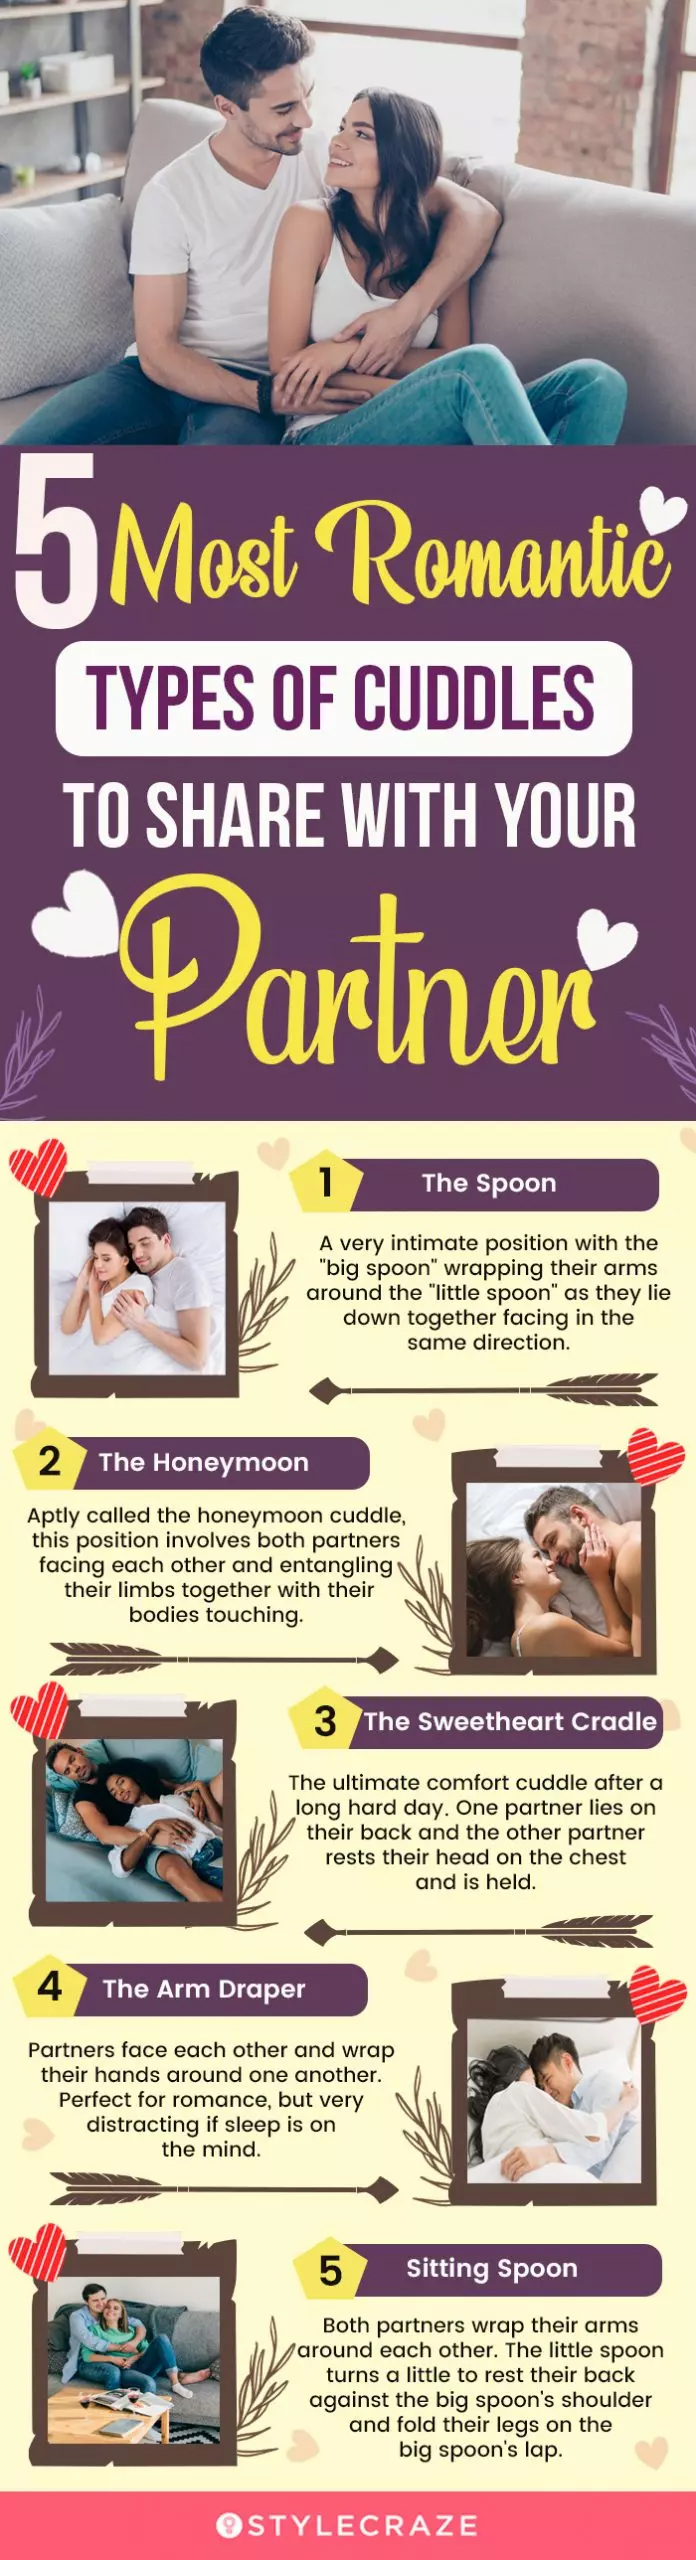 5 most romantic types of cuddles to share with your partner (infographic)